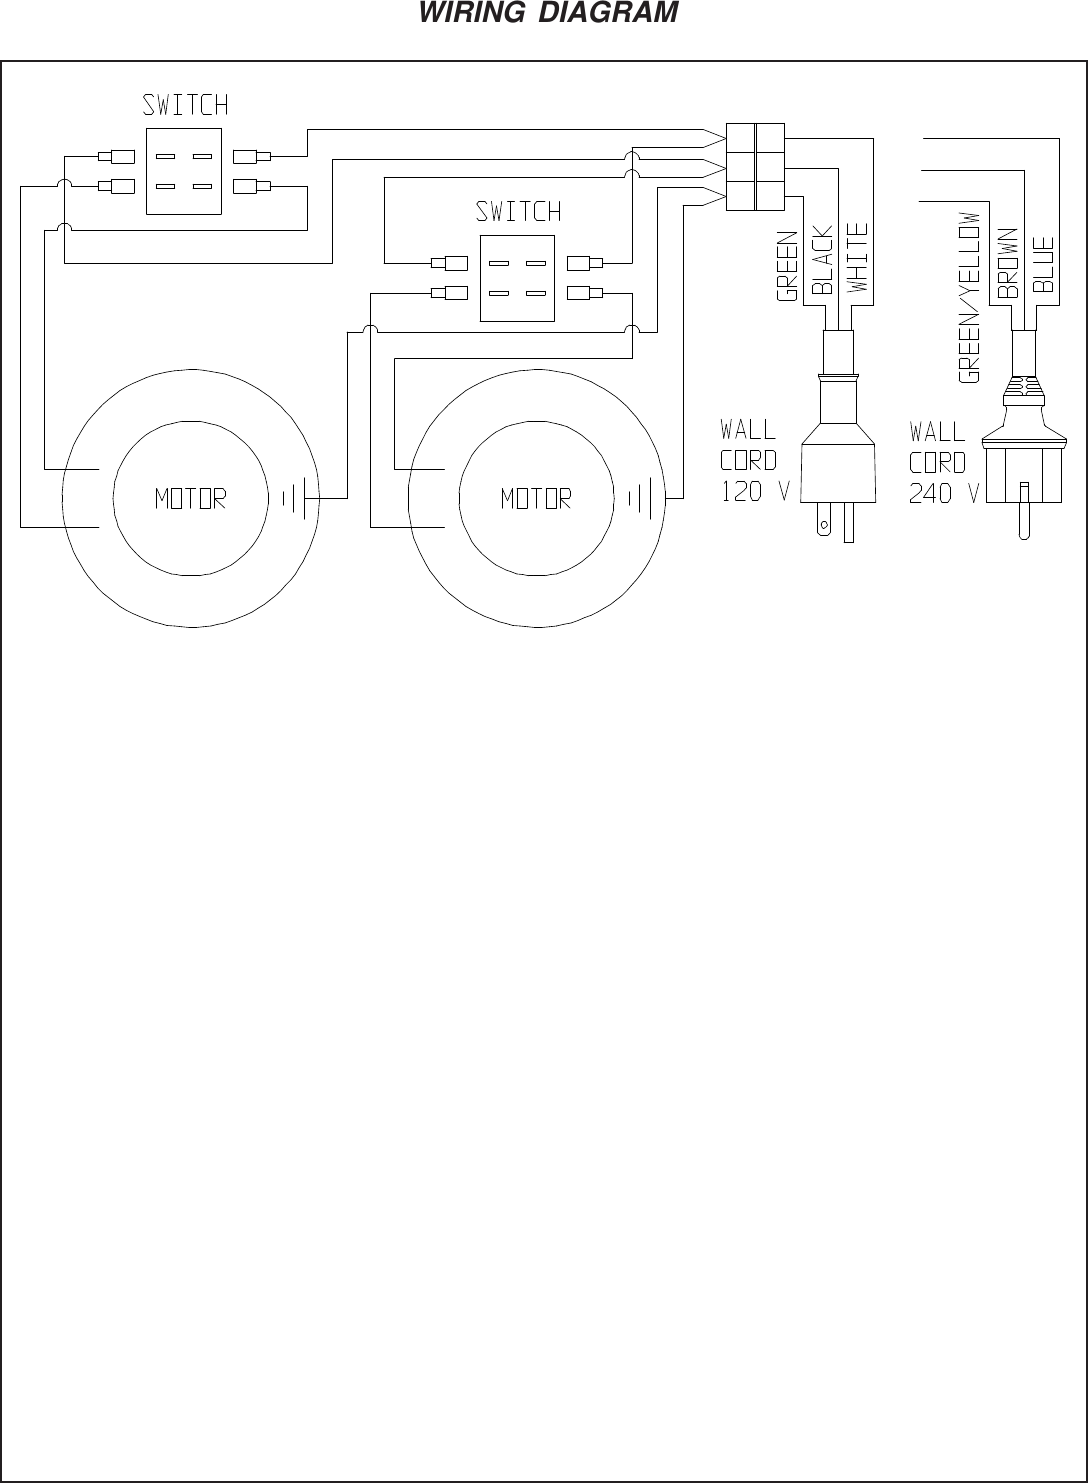 Page 7 of 8 - 9095715 Designer 16 Illustrated Parts Book Orig-1_10-07_pcn_11701.pmd  Nss-designer-16-wet-dry-vac-parts-manual